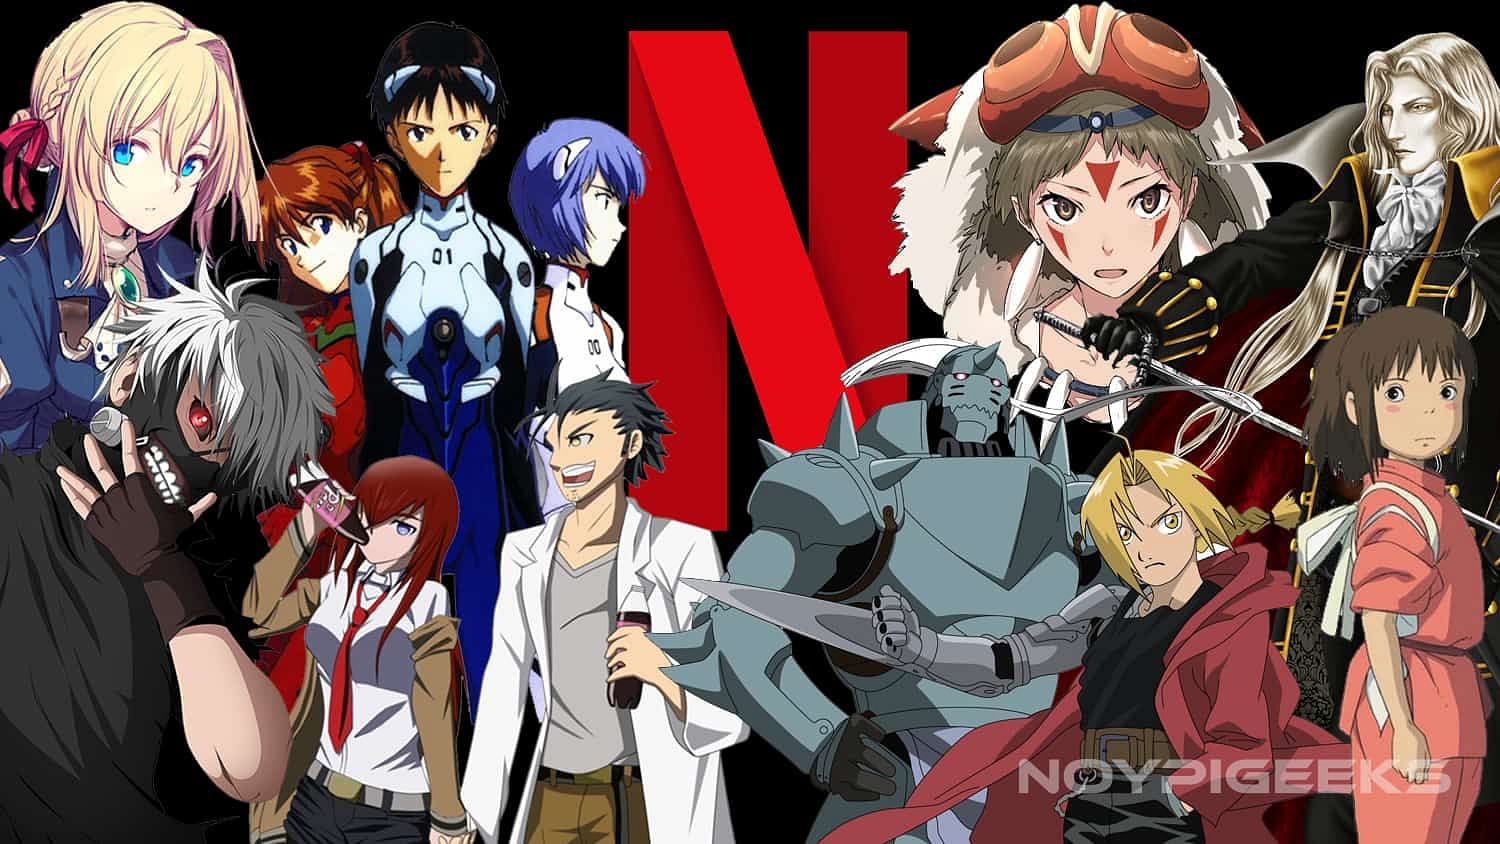 22 of the Best Anime TV Shows and Movies on Netflix